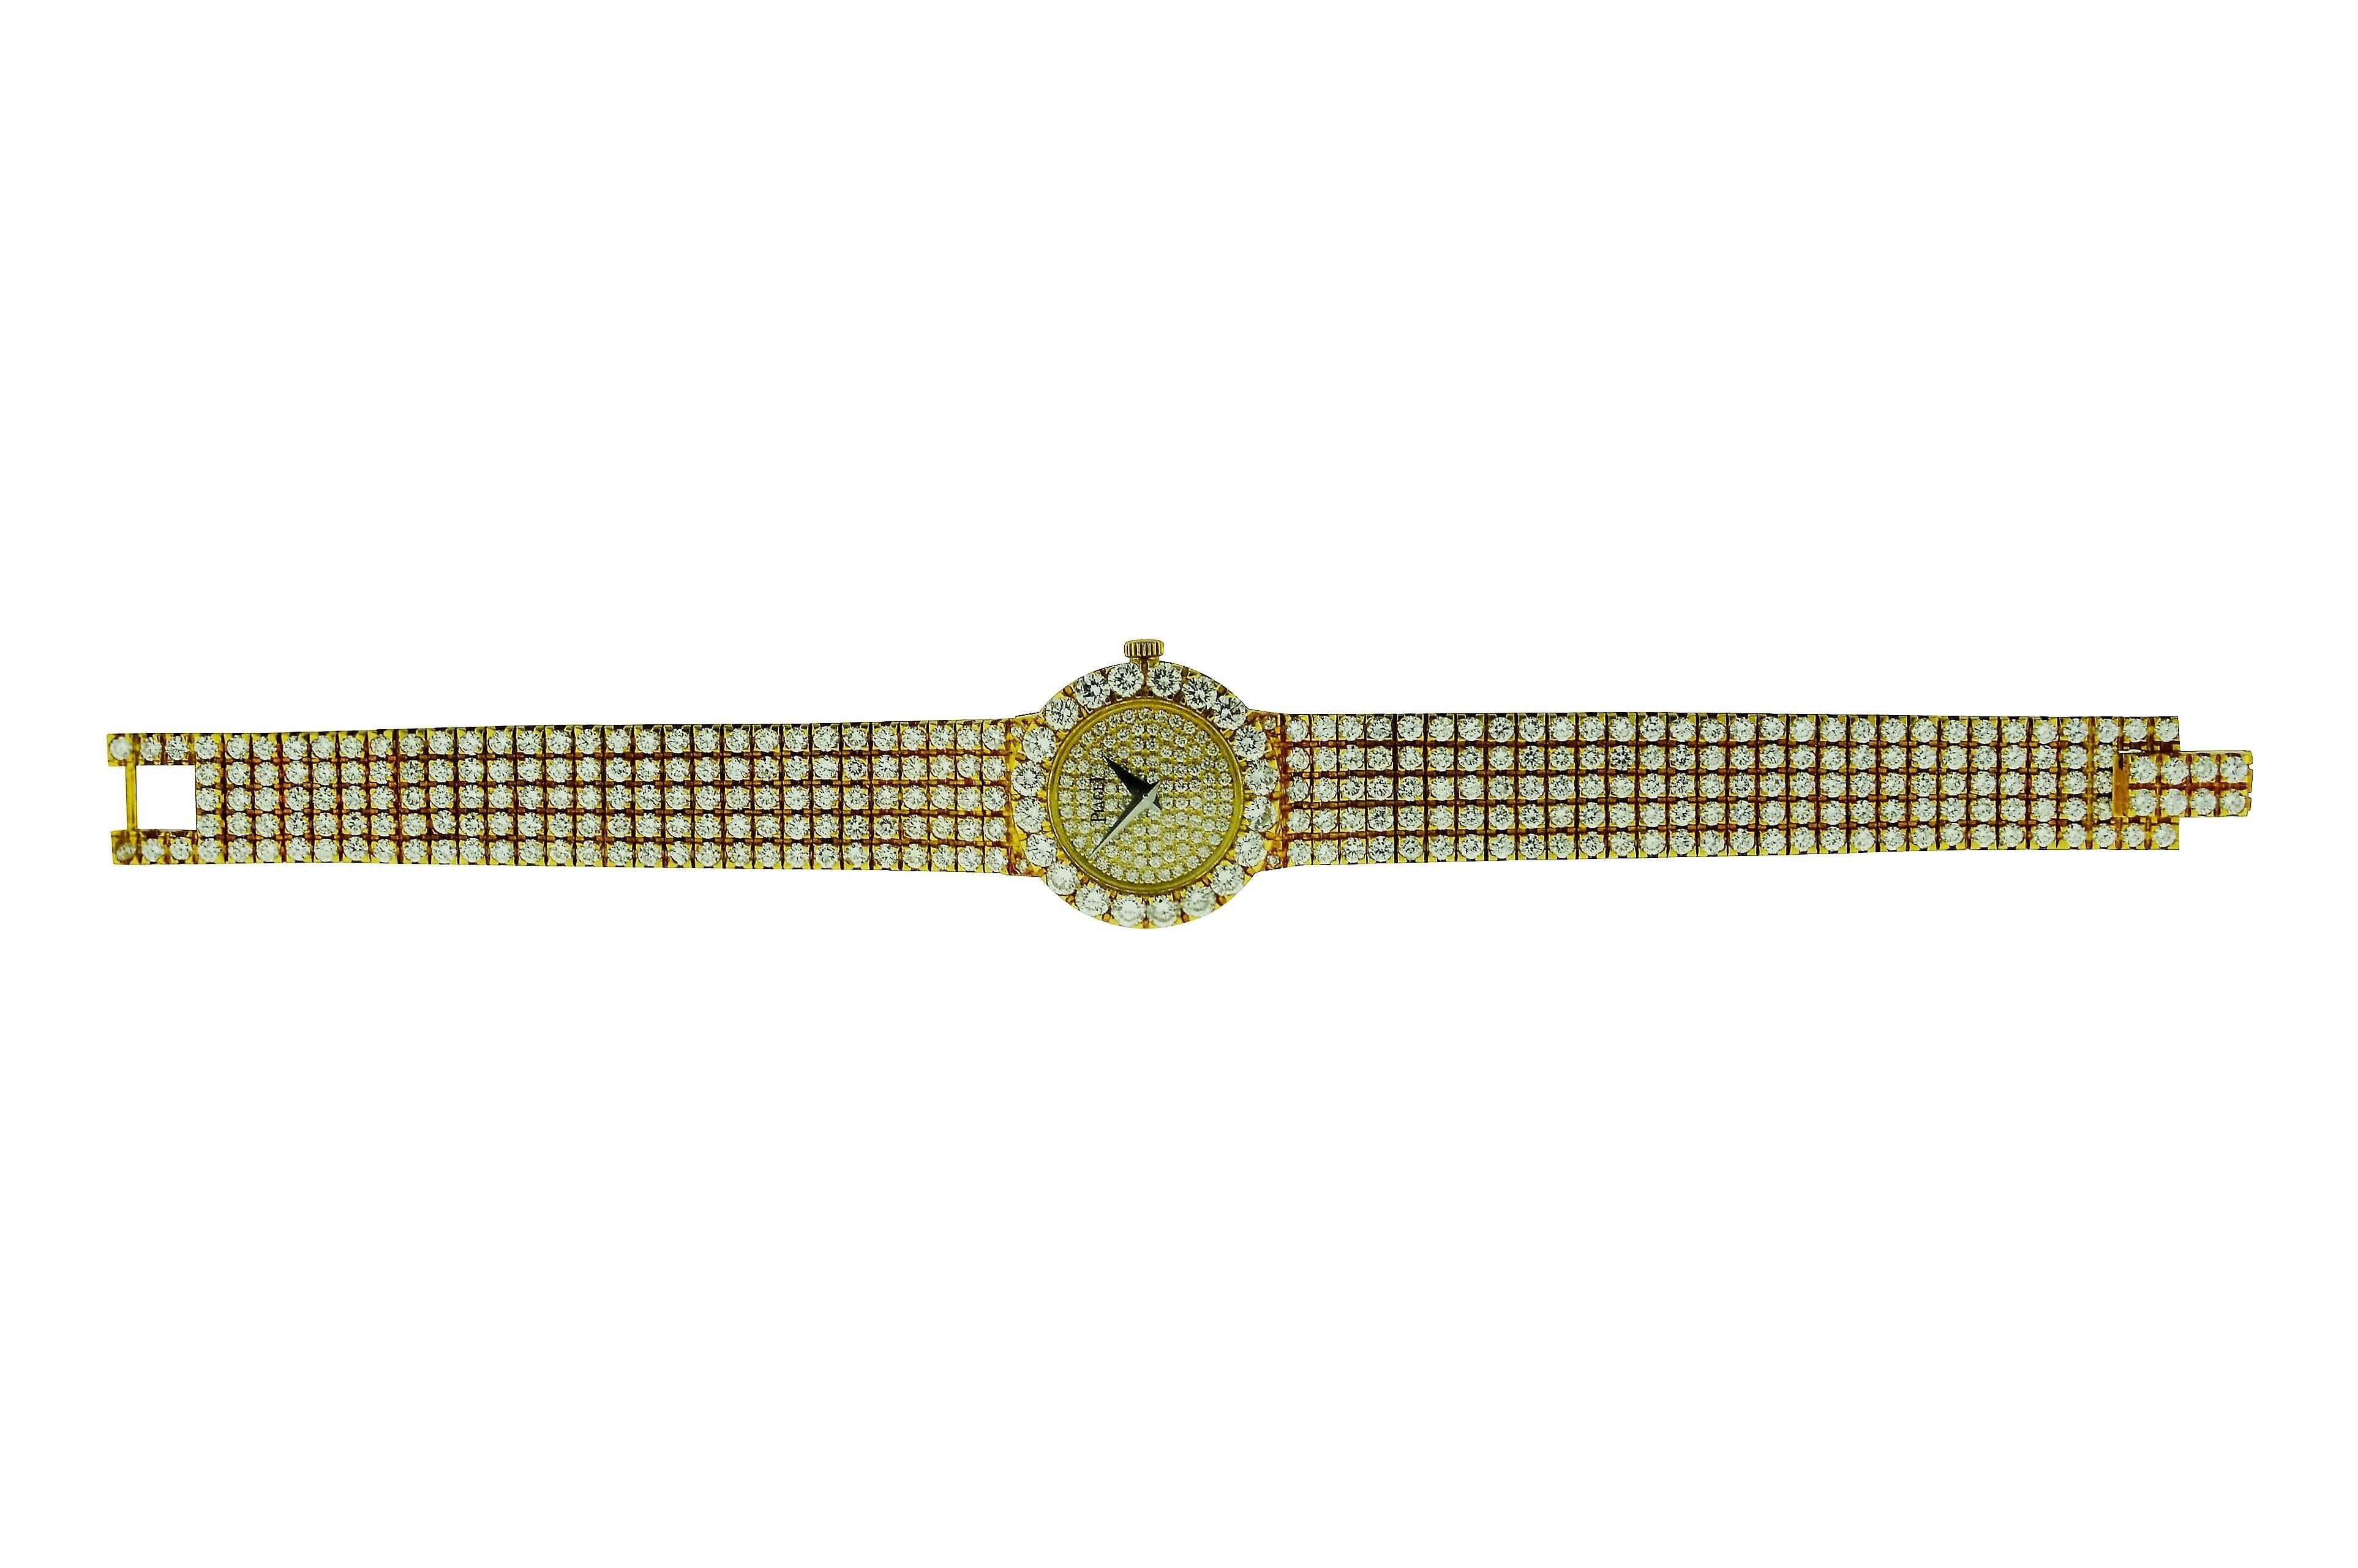 FACTORY / HOUSE: Paiget Watch Company
STYLE / REFERENCE: Diamond Dress Watch
MOVEMENT / CALIBER: Quartz
DIAL / HANDS: Original, Pave, Dauphine Hands
DIMENSIONS: 20 mm Head
ATTACHMENT / LENGTH: 18Kt. Yellow Gold Diamond Pave, Length, 6.5 Inches,